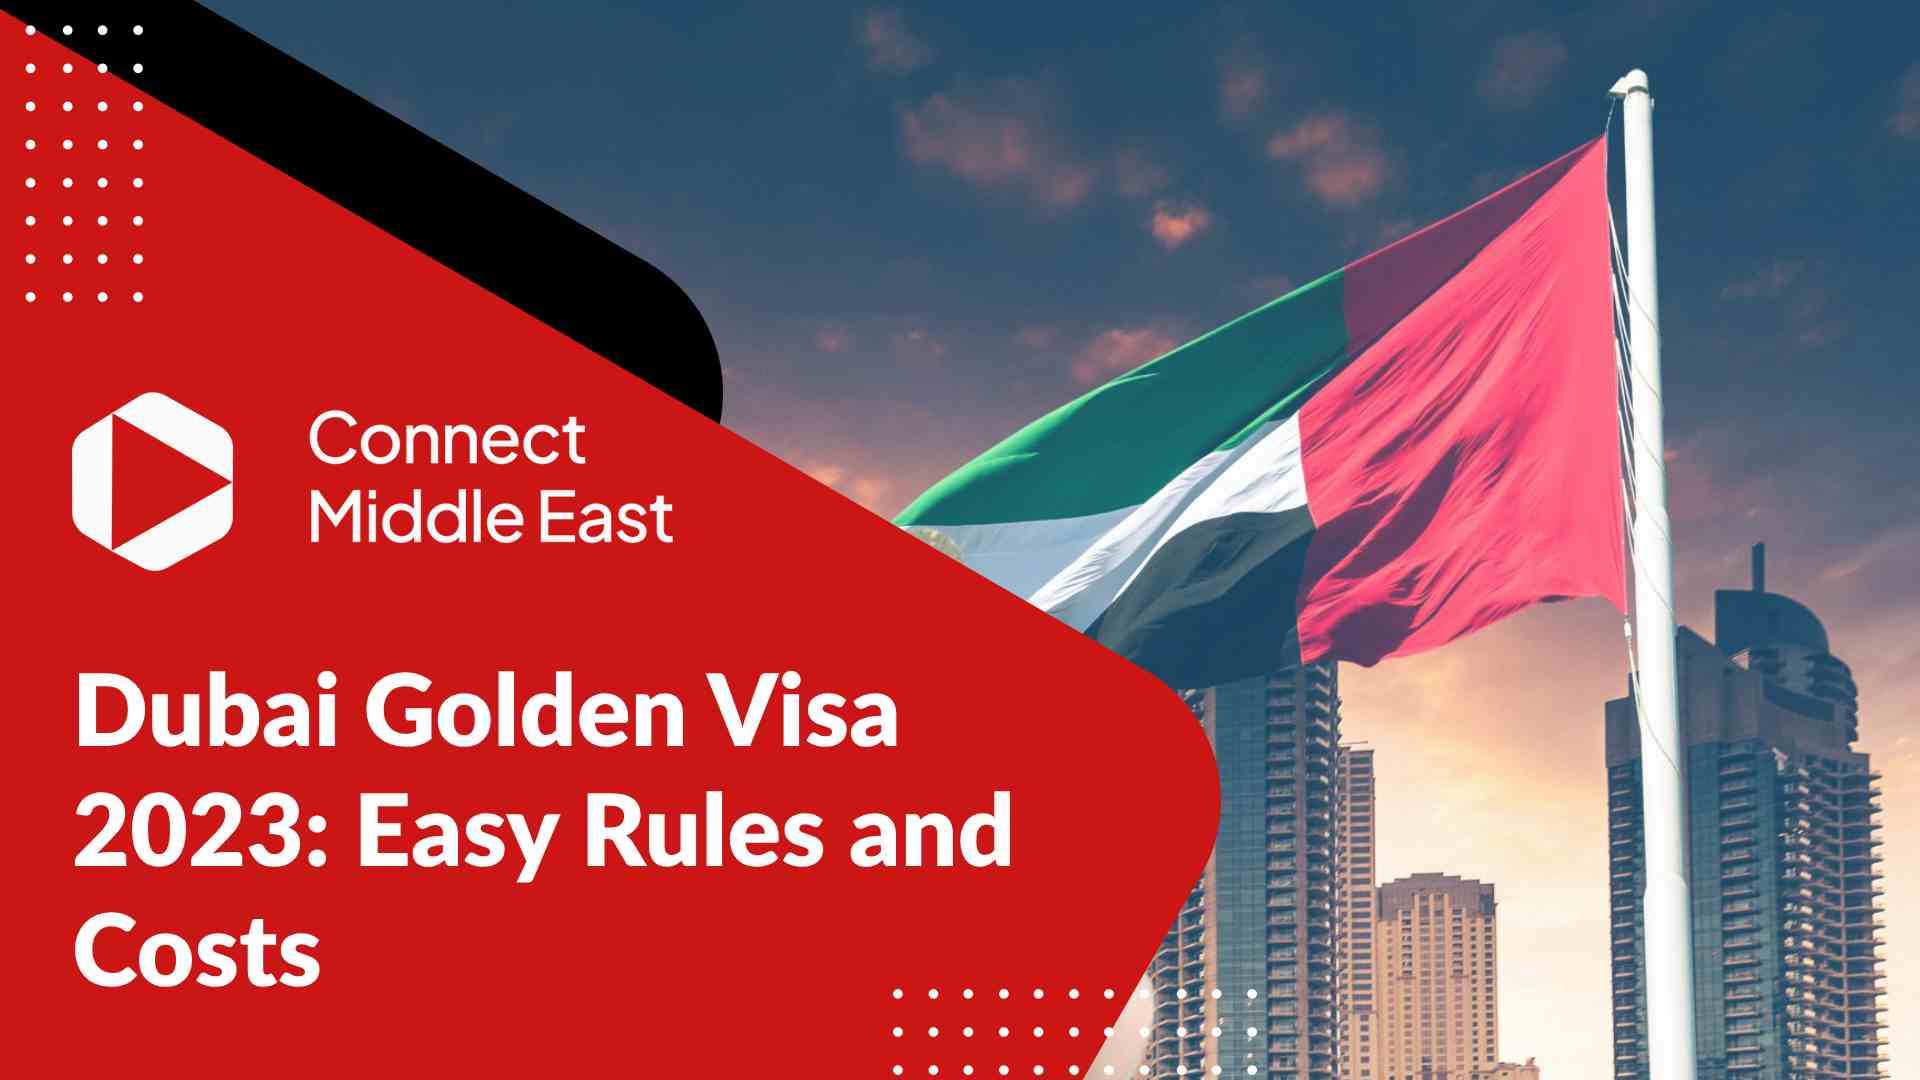 2023 Dubai Golden Visa Clear Rules & Costs Overview